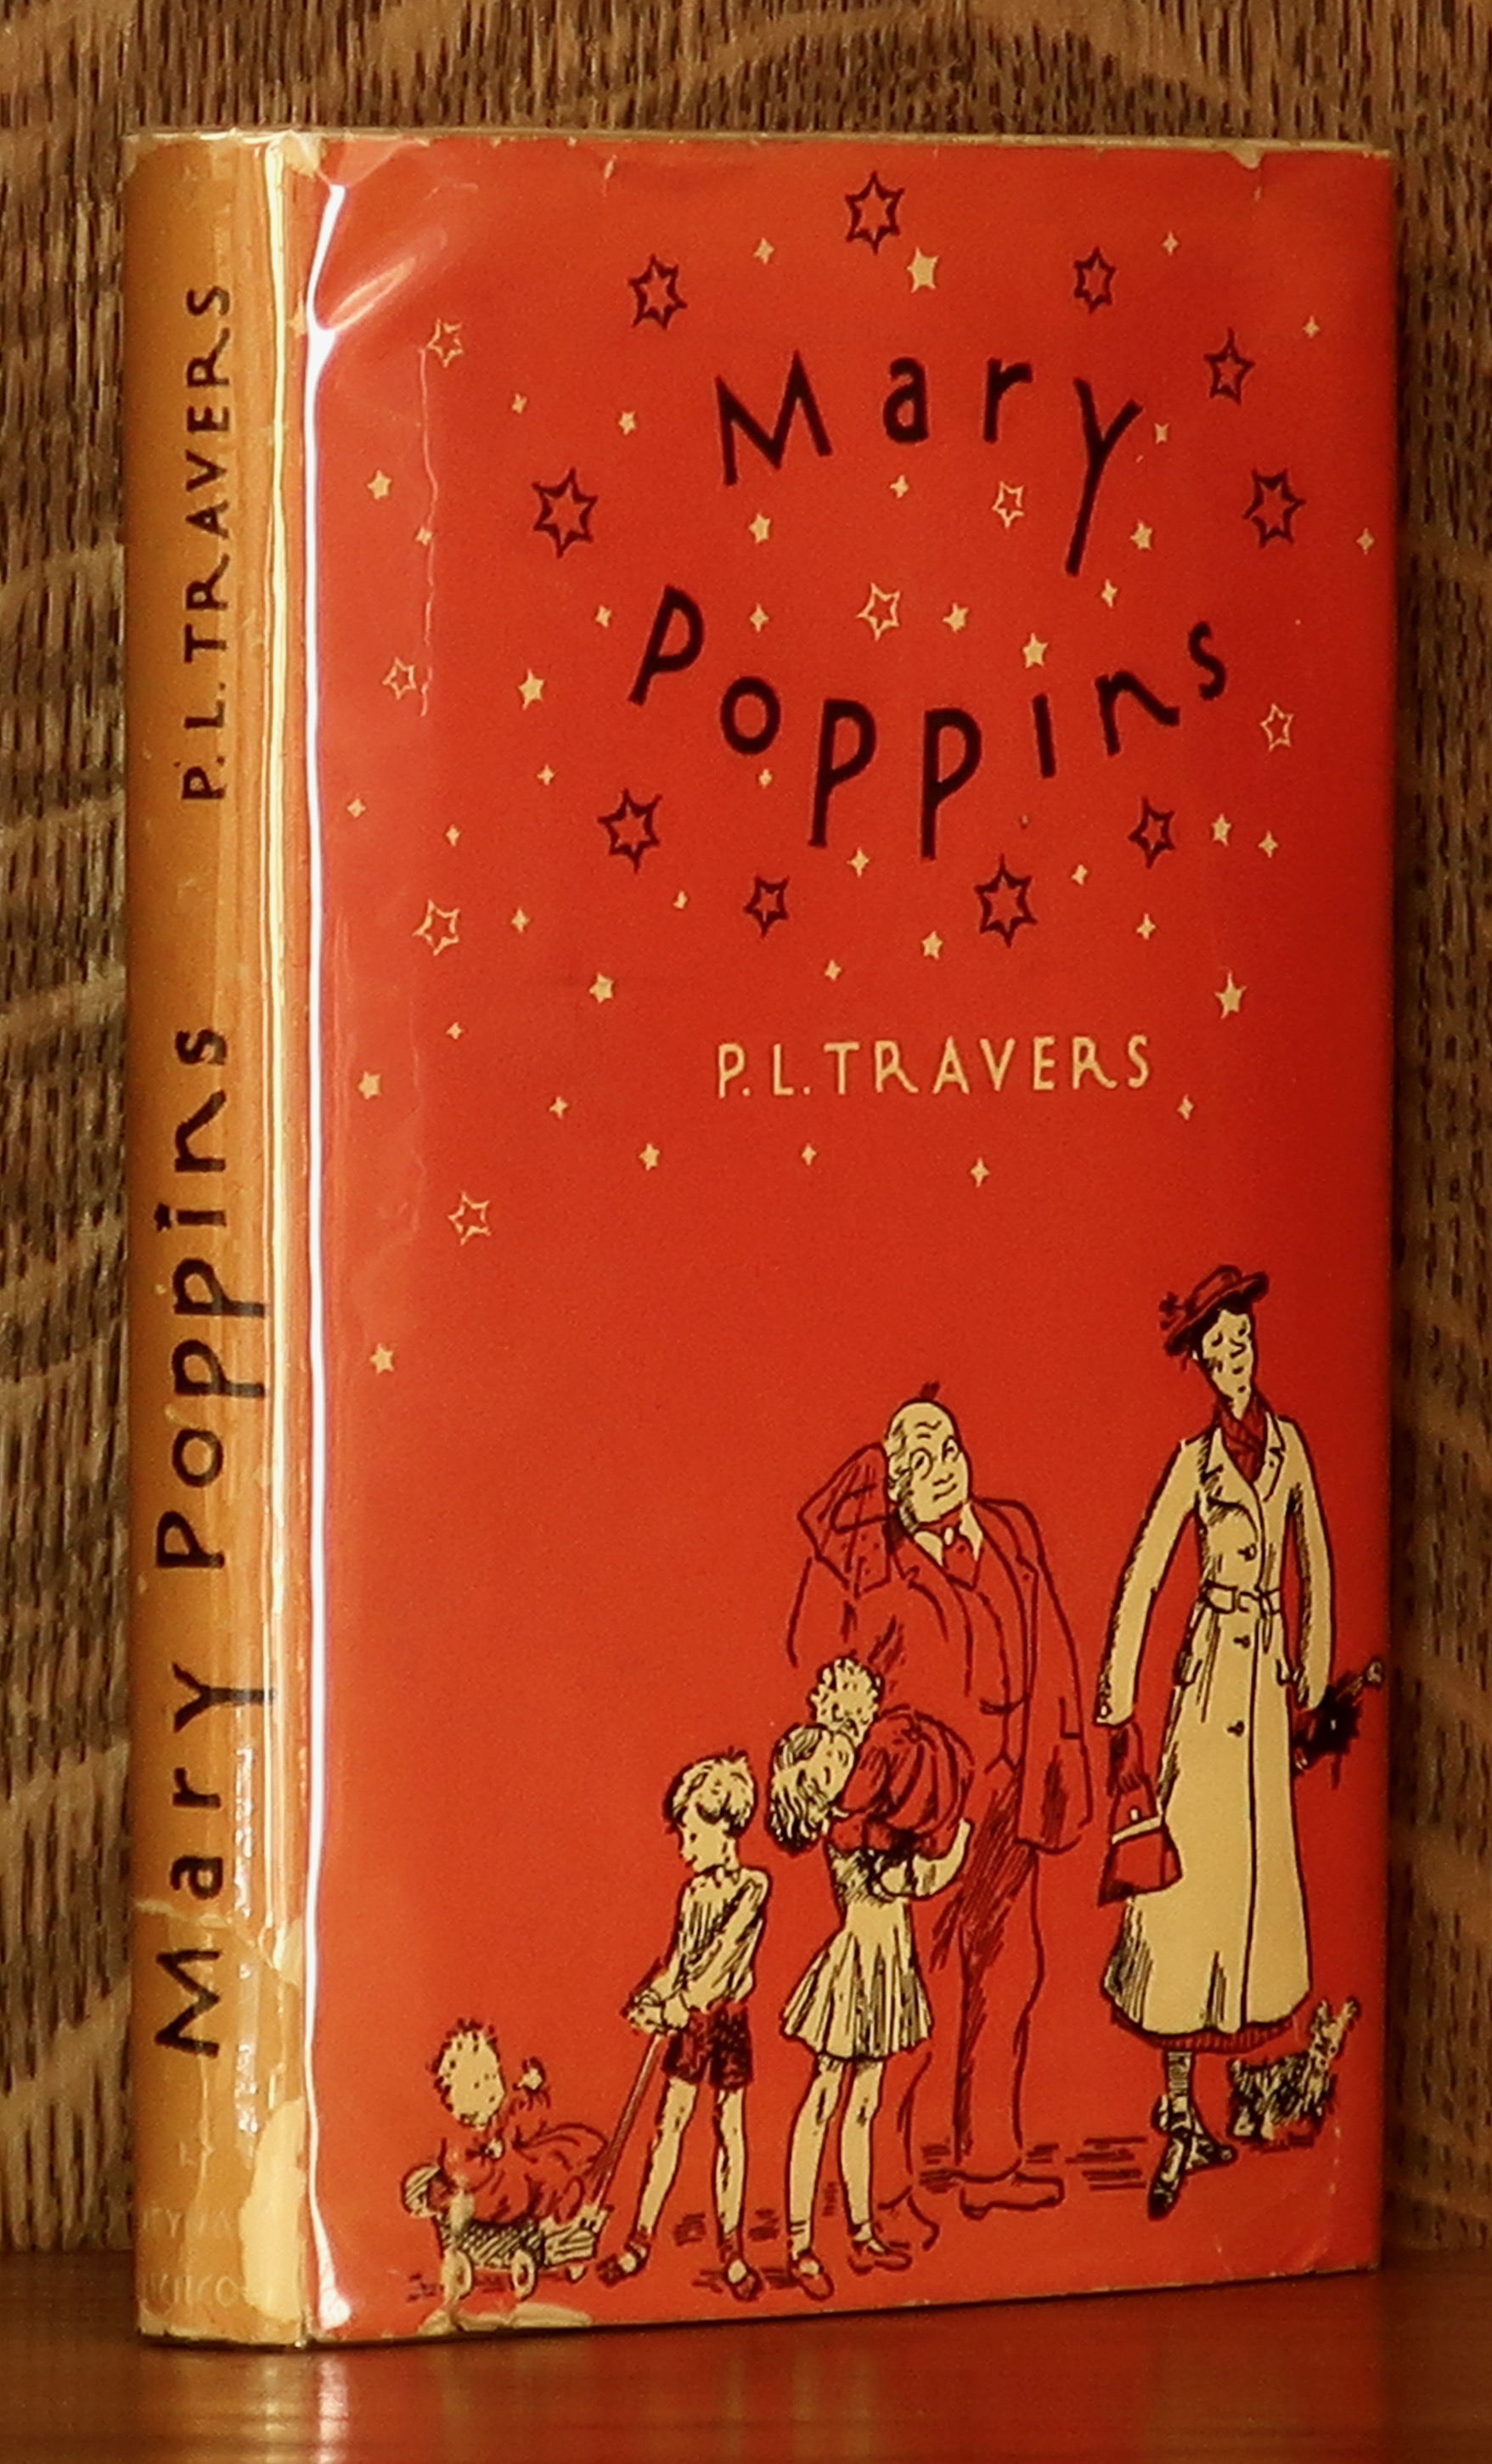 MARY POPPINS - P. L. Travers, illustrated by Mary Shepard